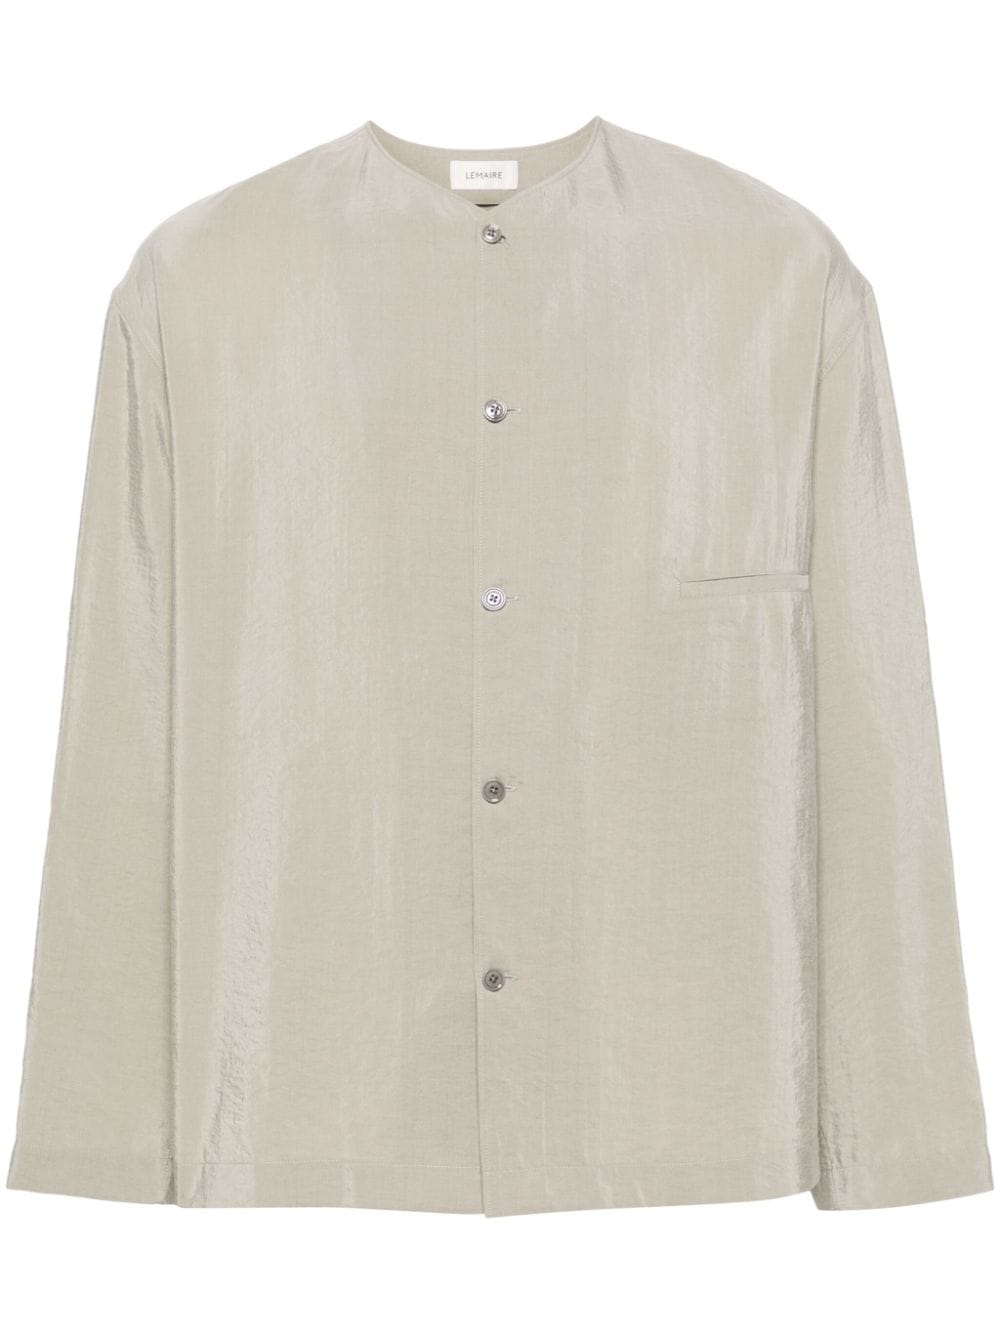 LEMAIRE crinkled collarless shirt - Grey von LEMAIRE